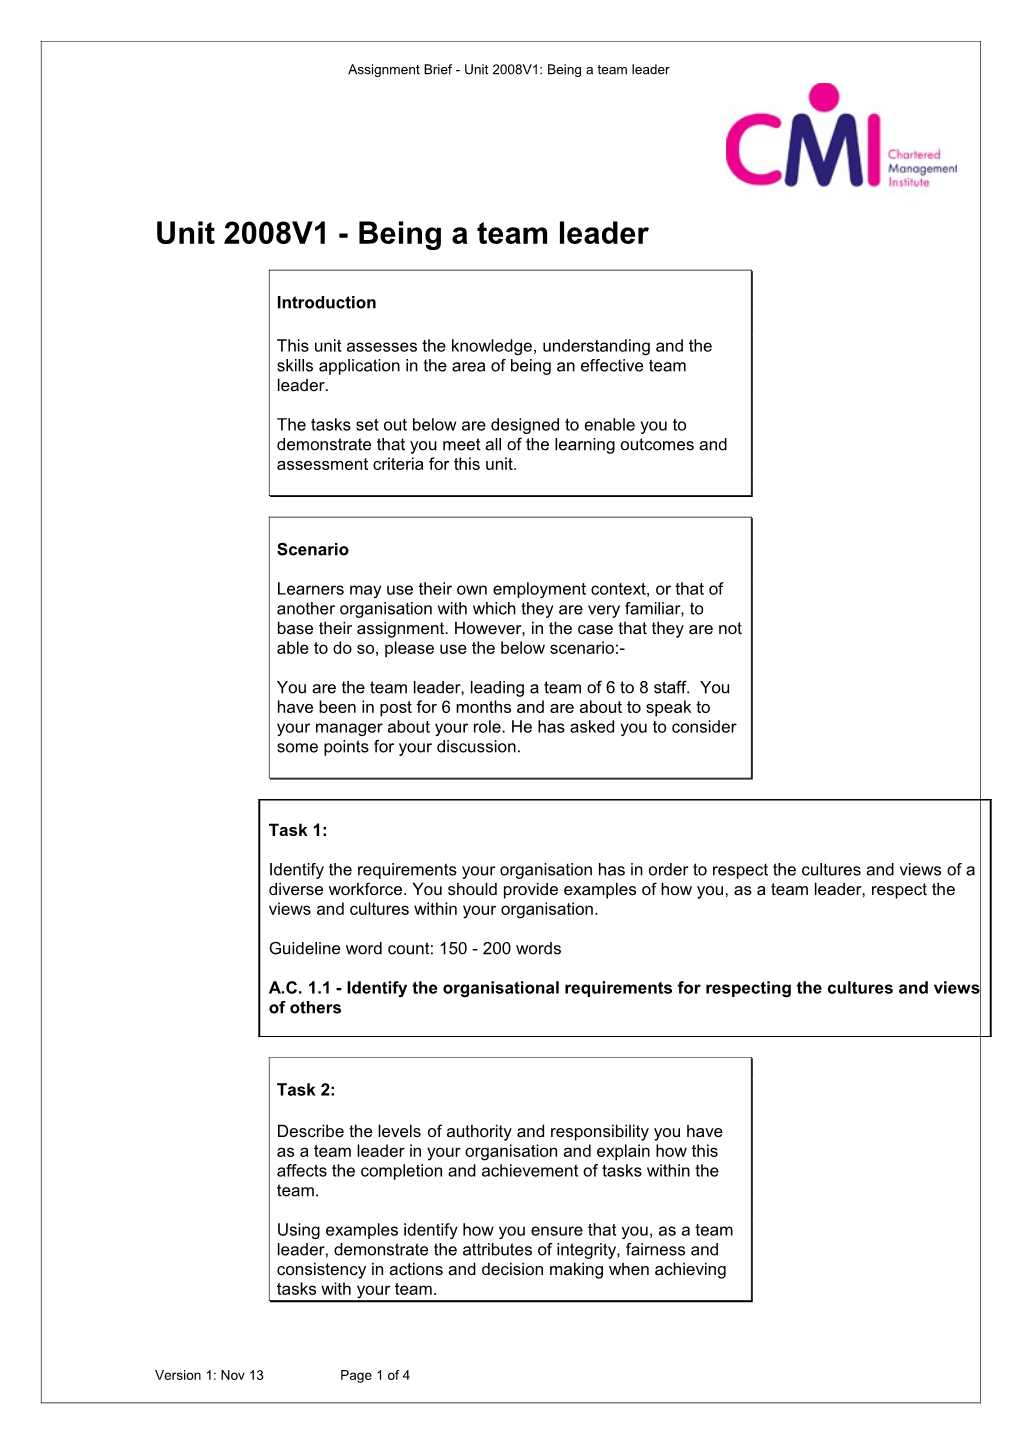 Assignment Brief - Unit 2008V1: Being a Team Leader